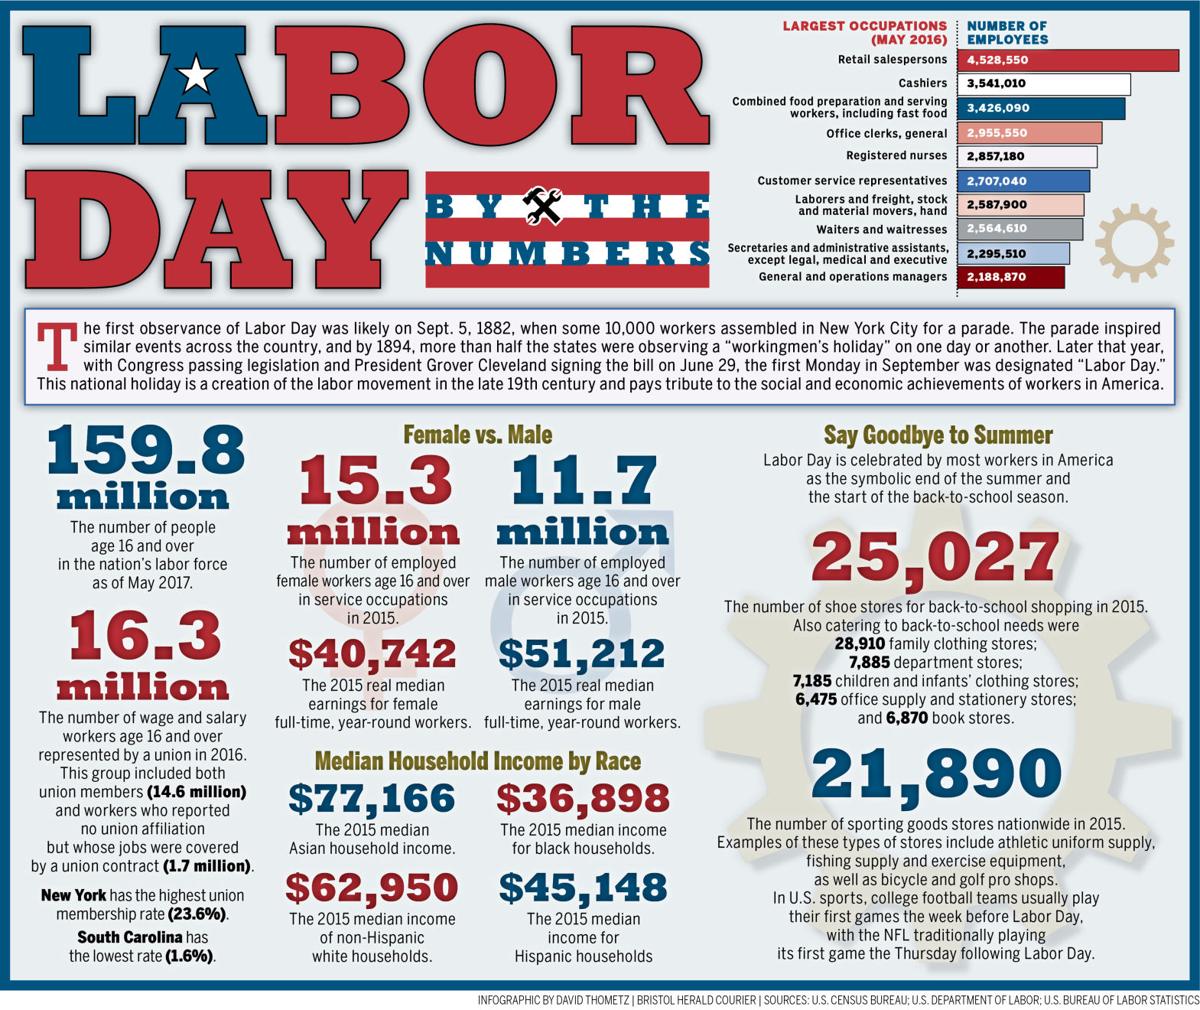 125th Anniversary of Labor Day A look at Labor Day by the numbers